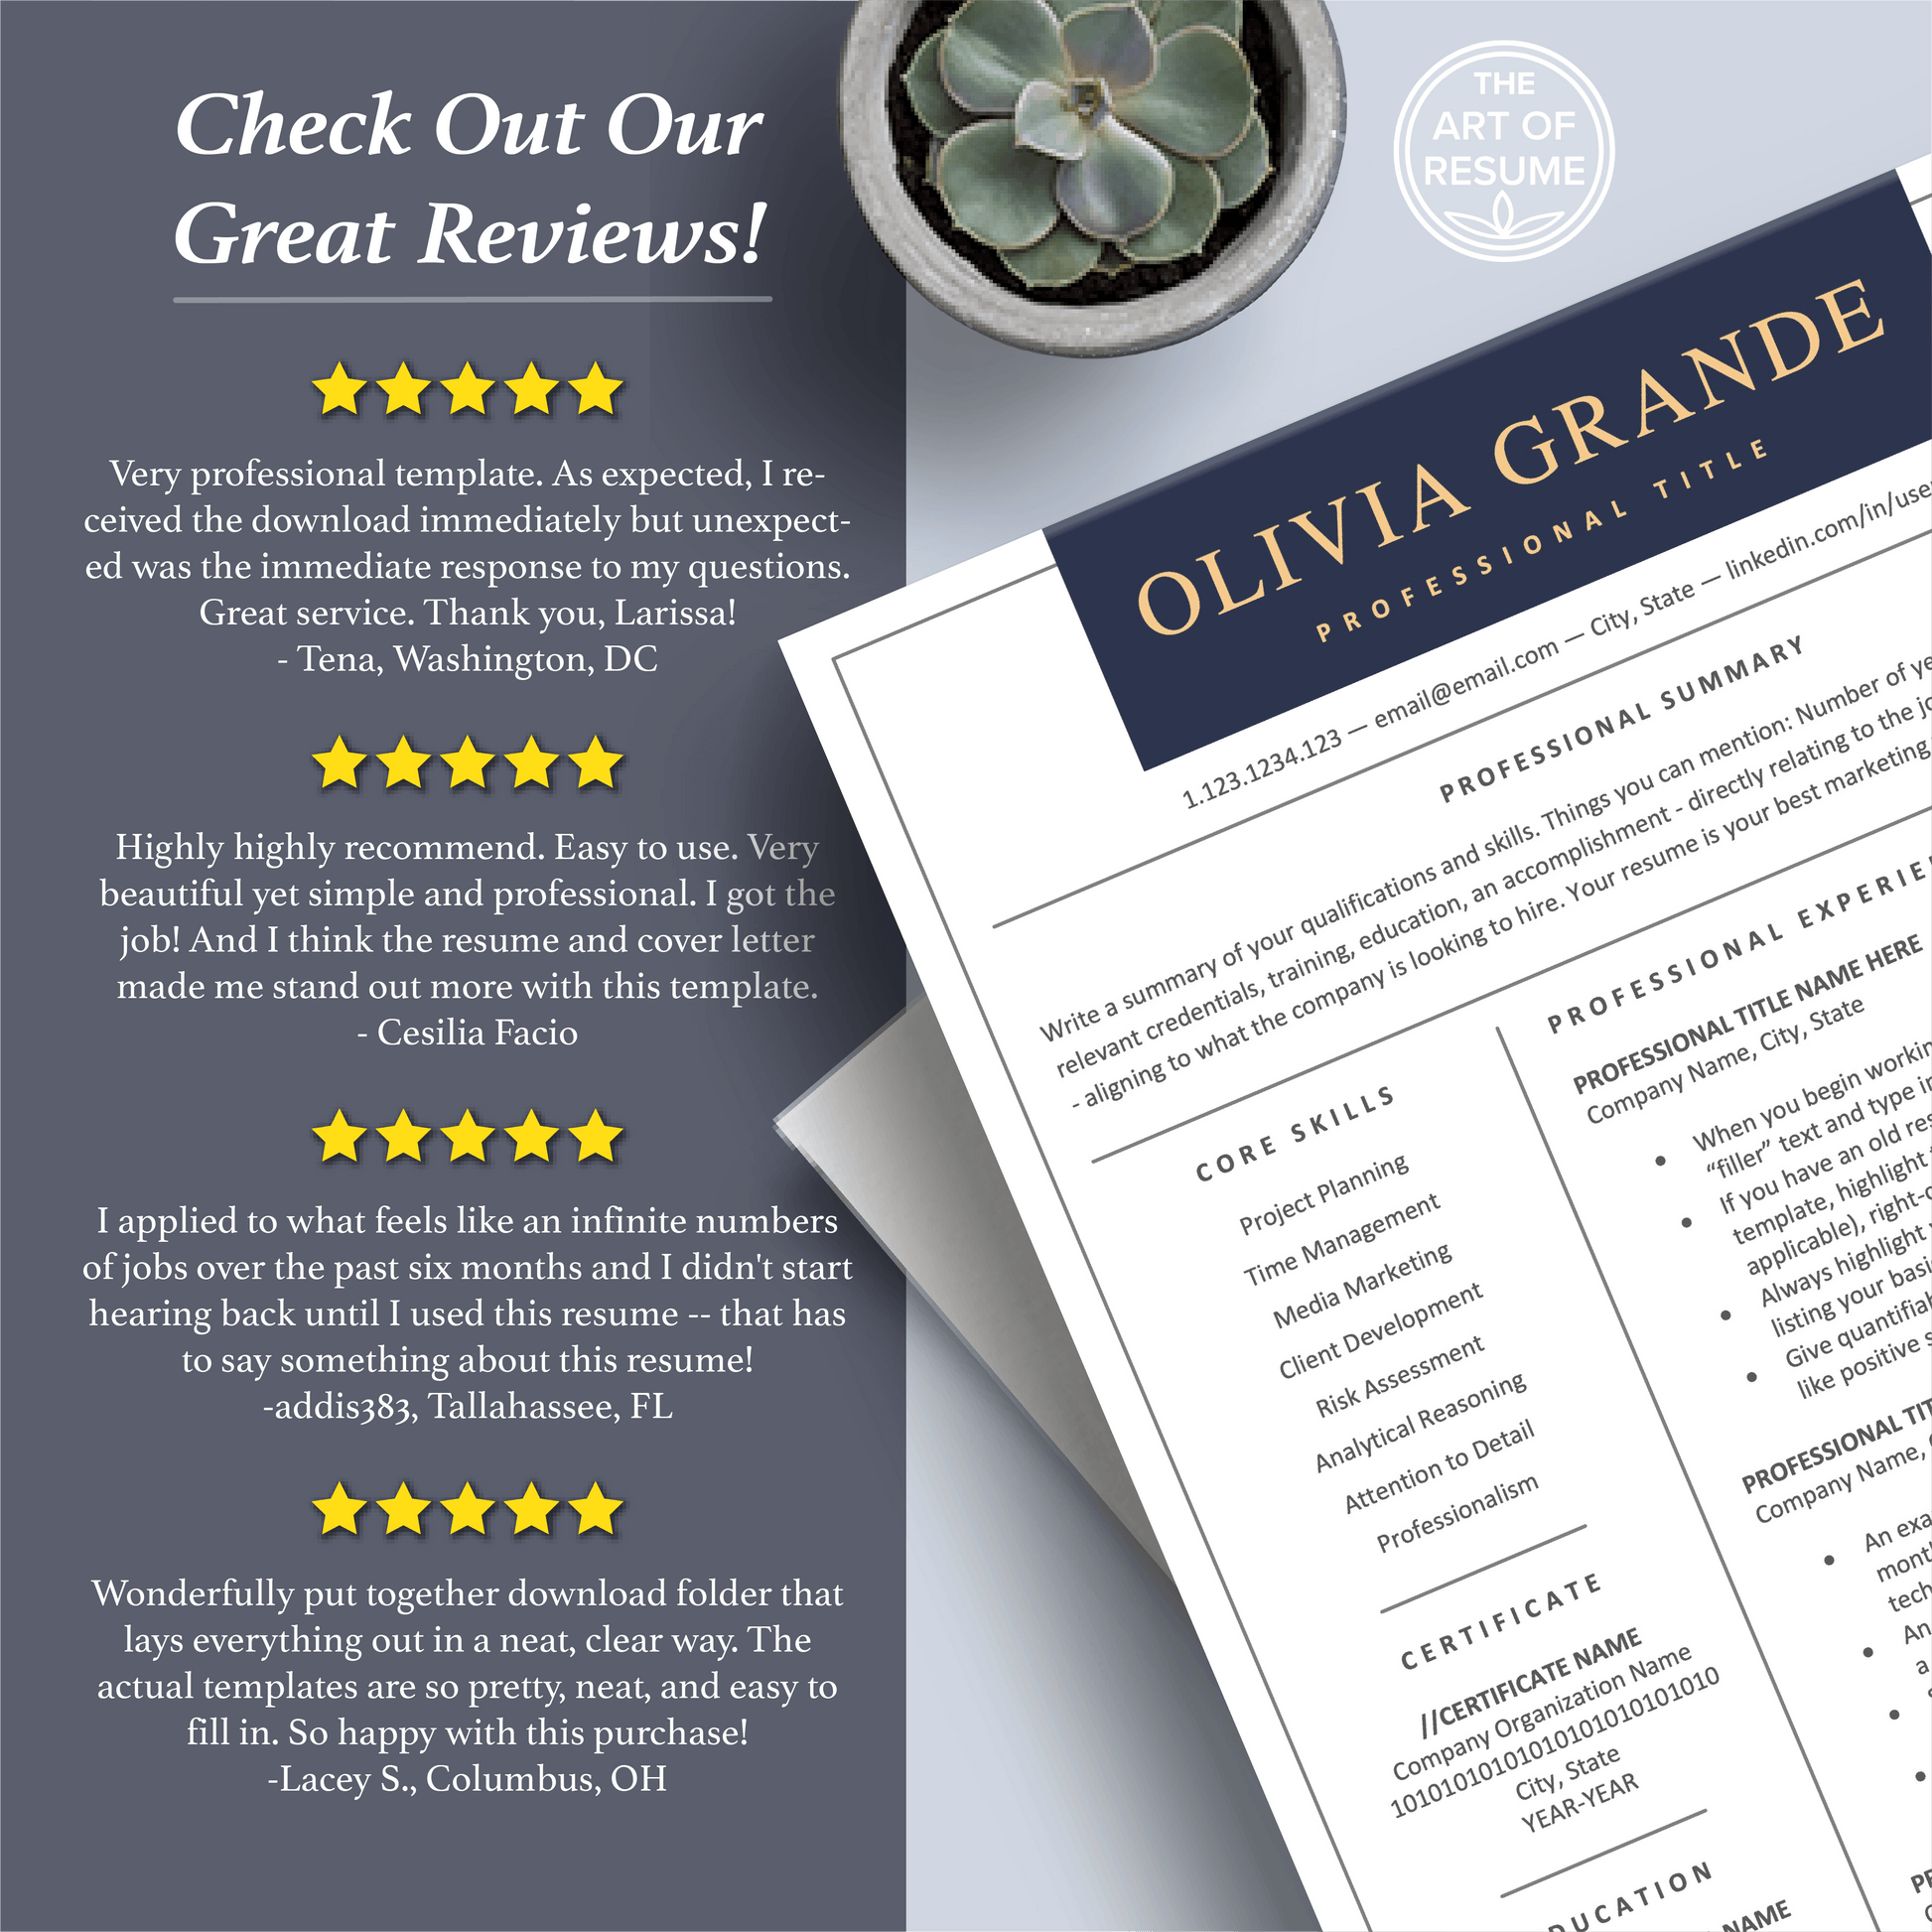 The Art of Resume Templates | Professional Resume CV Templates Online 5-Star Reviews